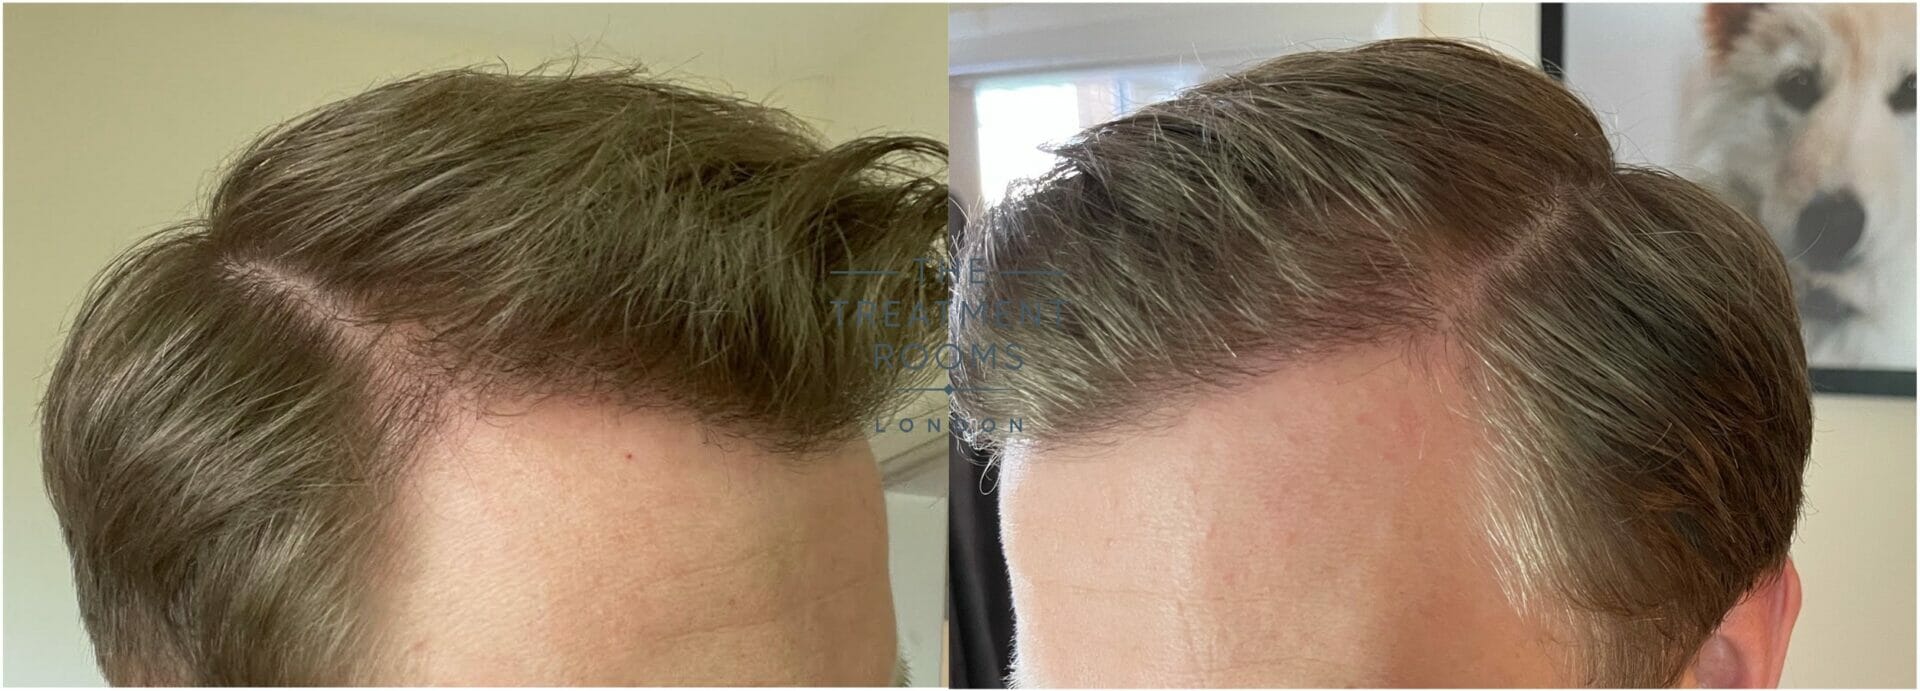 6 months after hair transplant